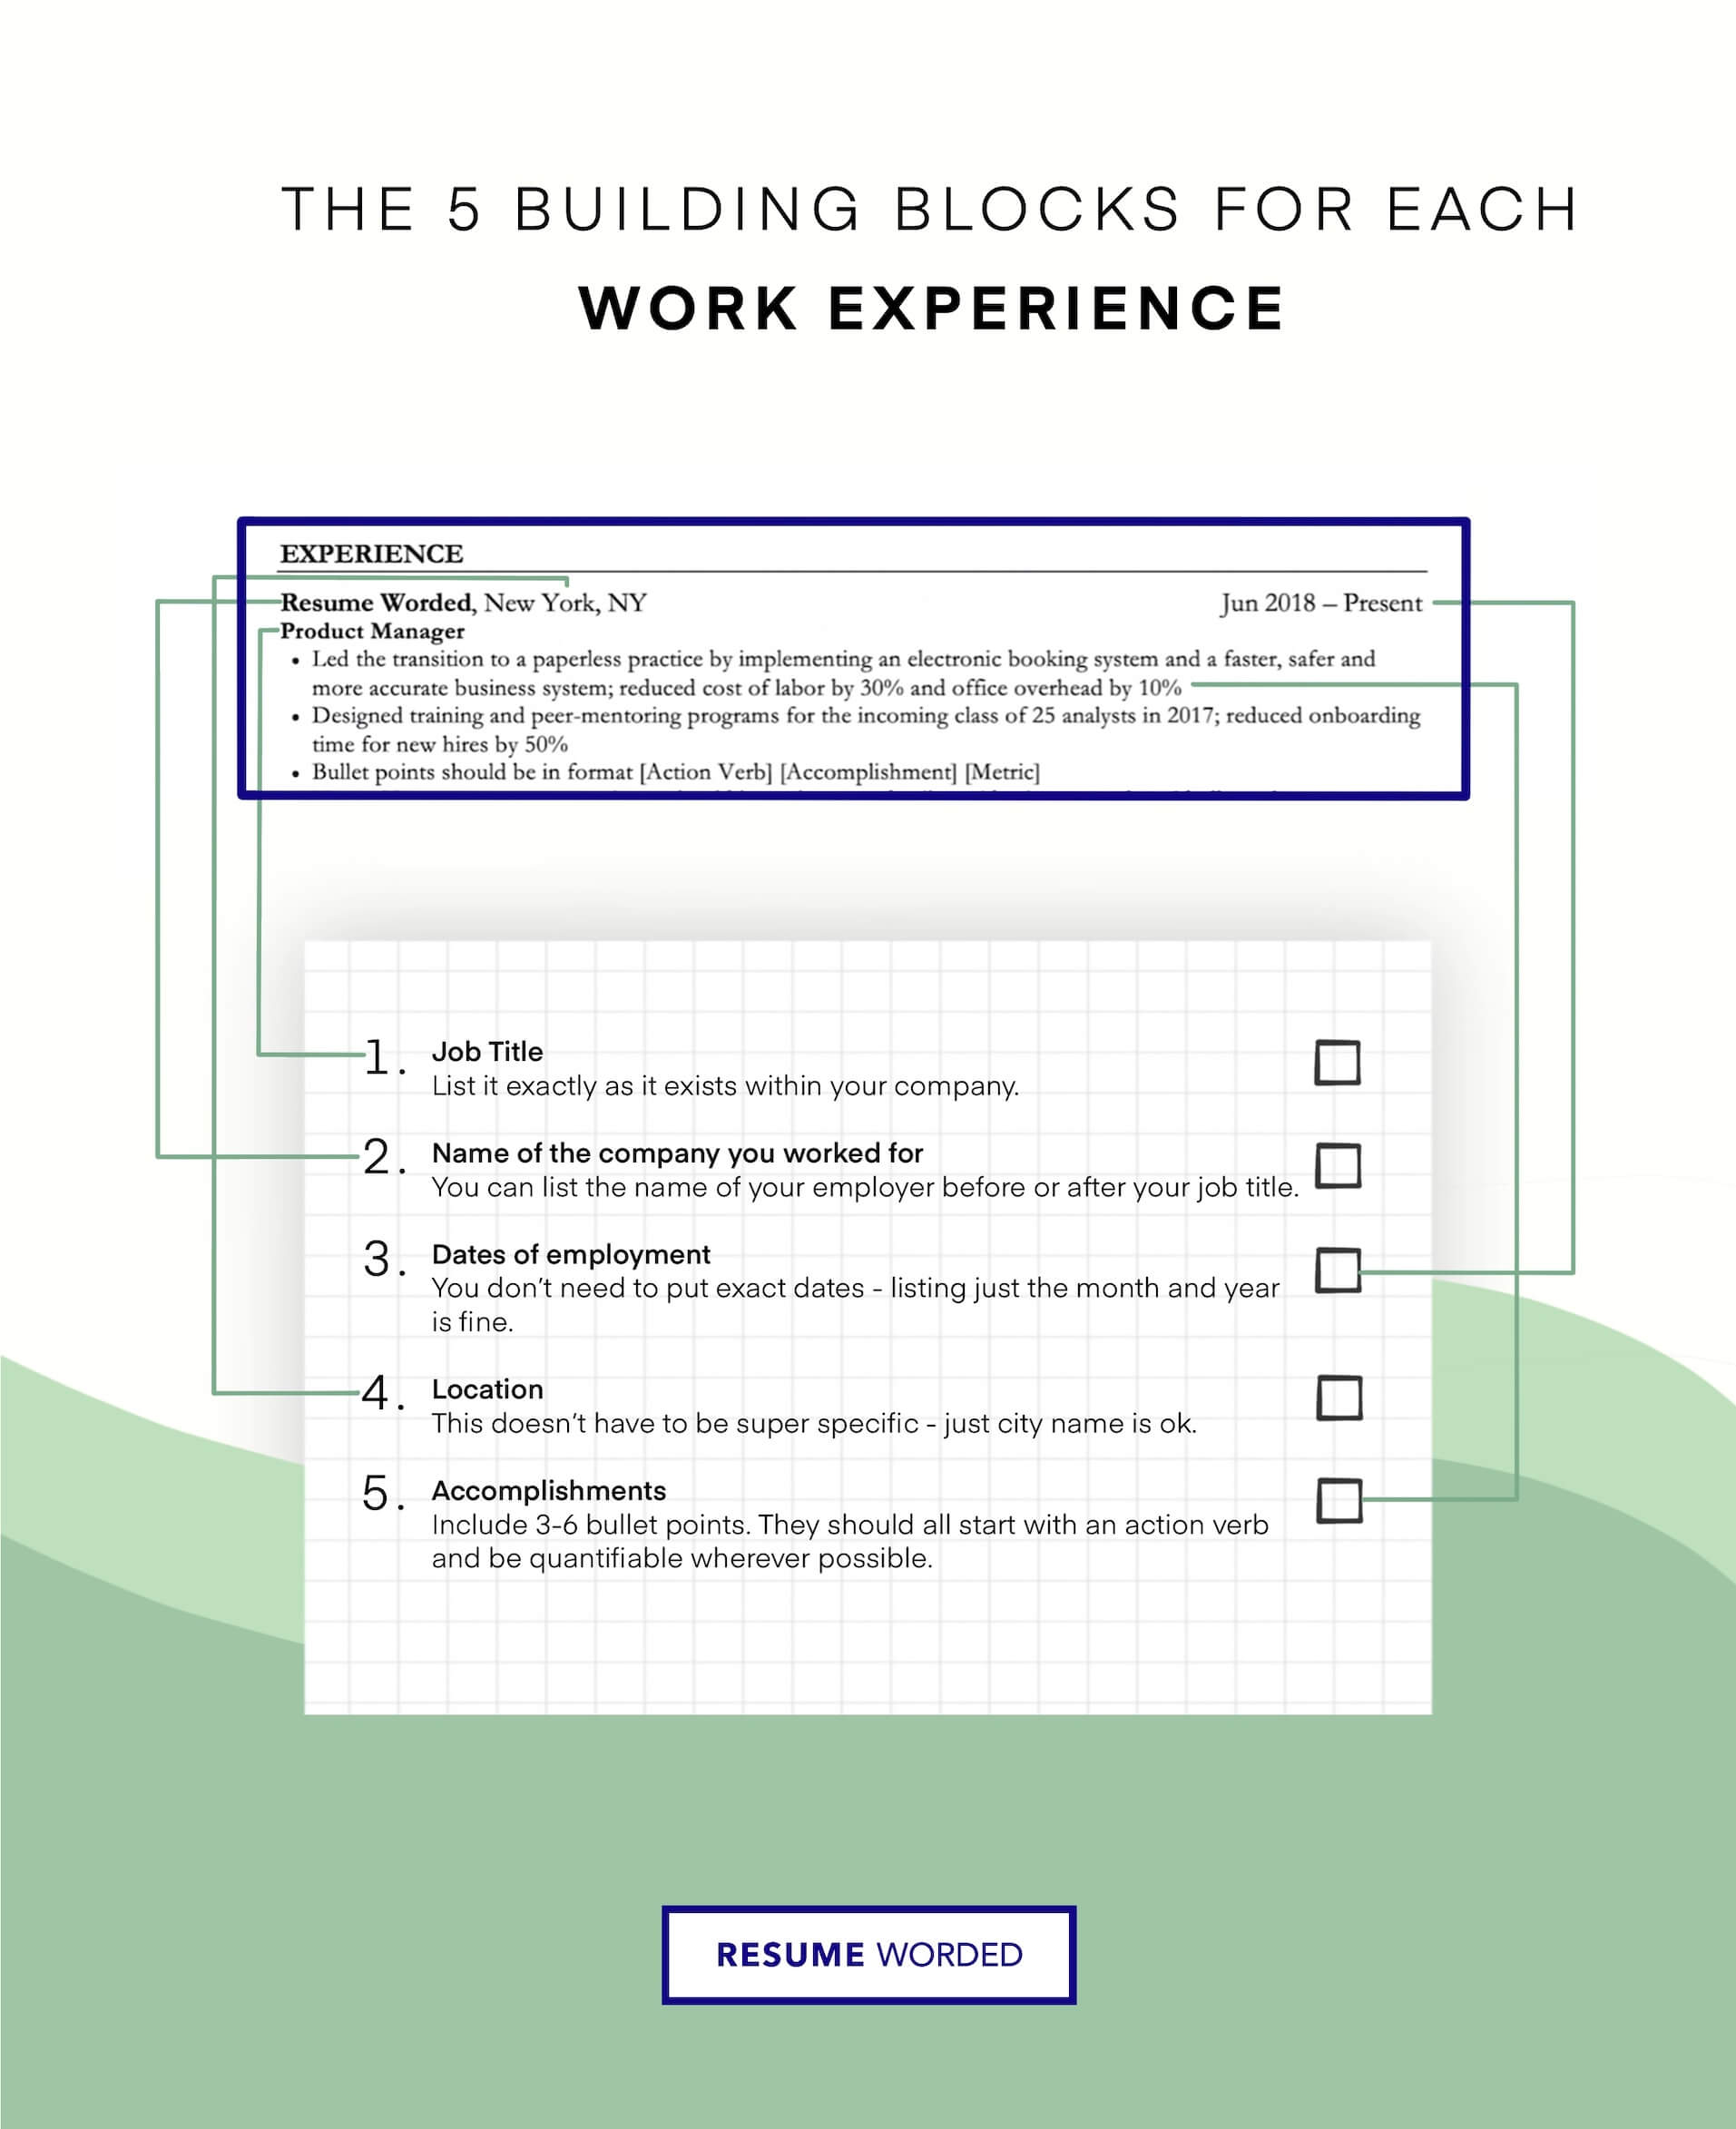 Highlight product lifecycle experience - Head of Product Resume